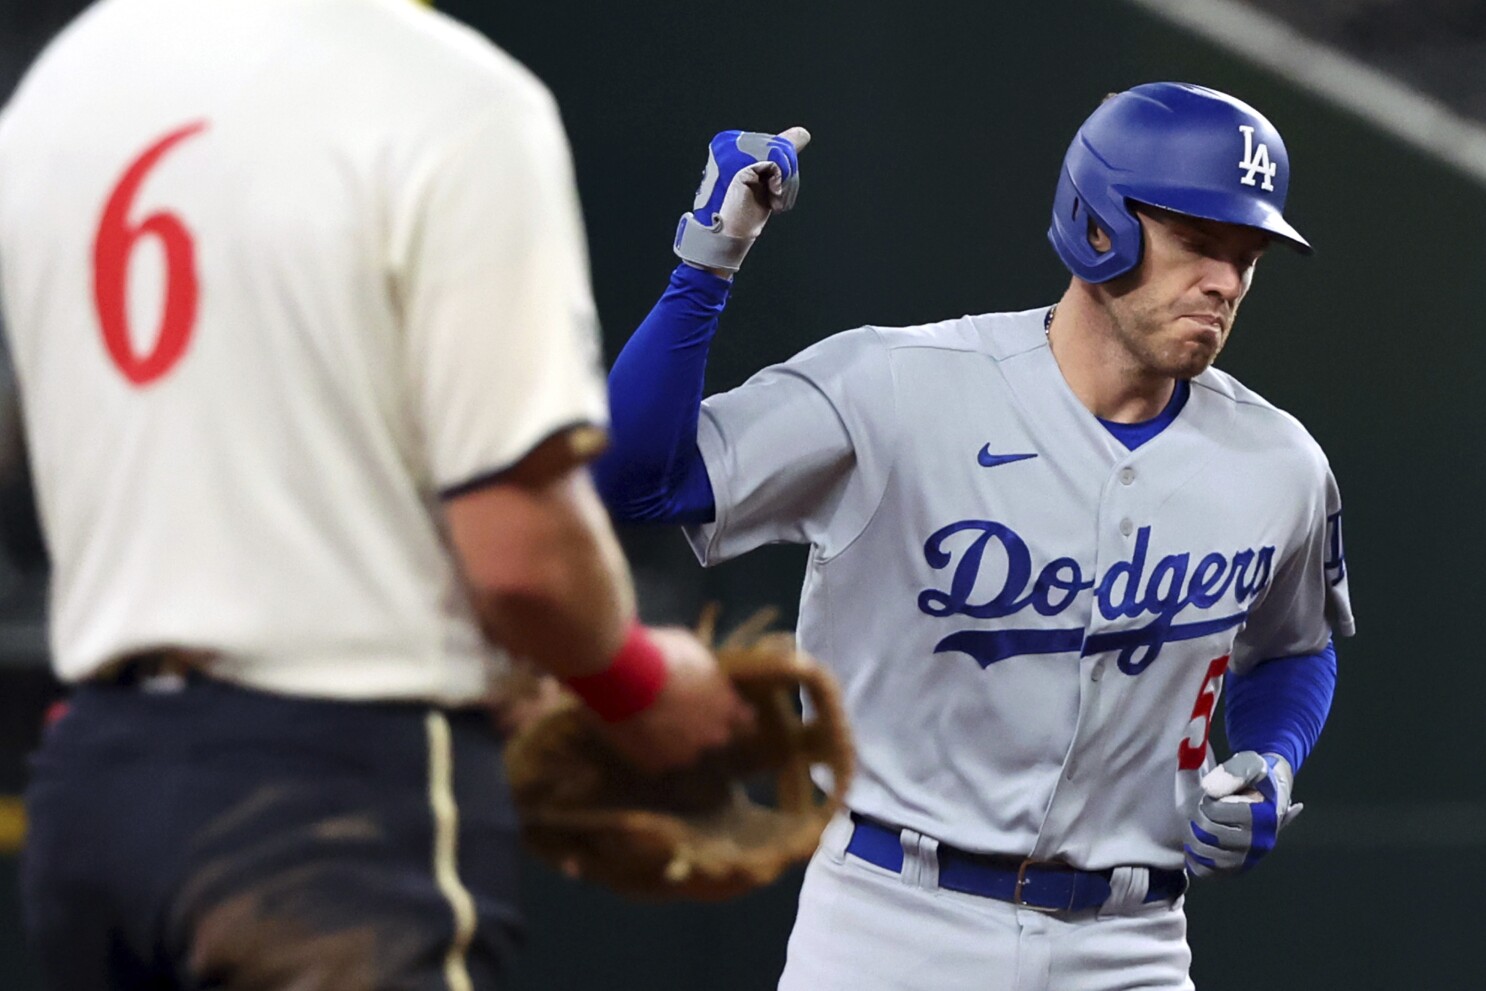 Dodgers beat Texas 11-5 in return to Globe Life Field, where they